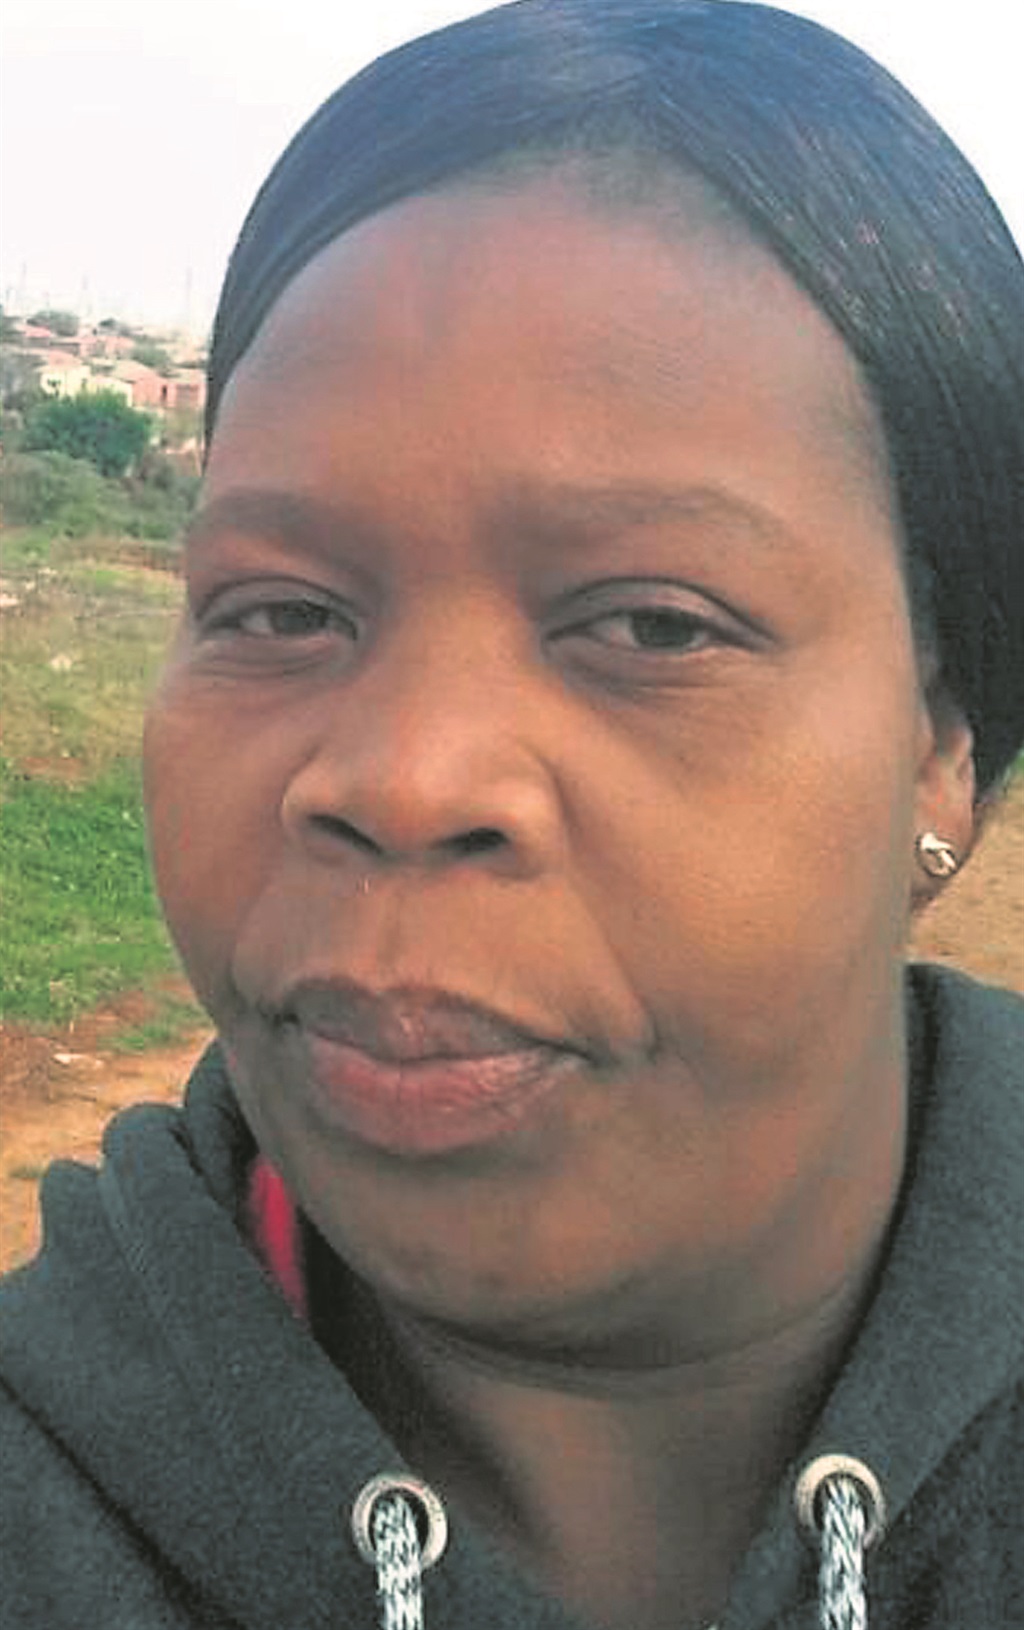 Alan Mhlakwana said she does not believe her brother was hit by a train.  